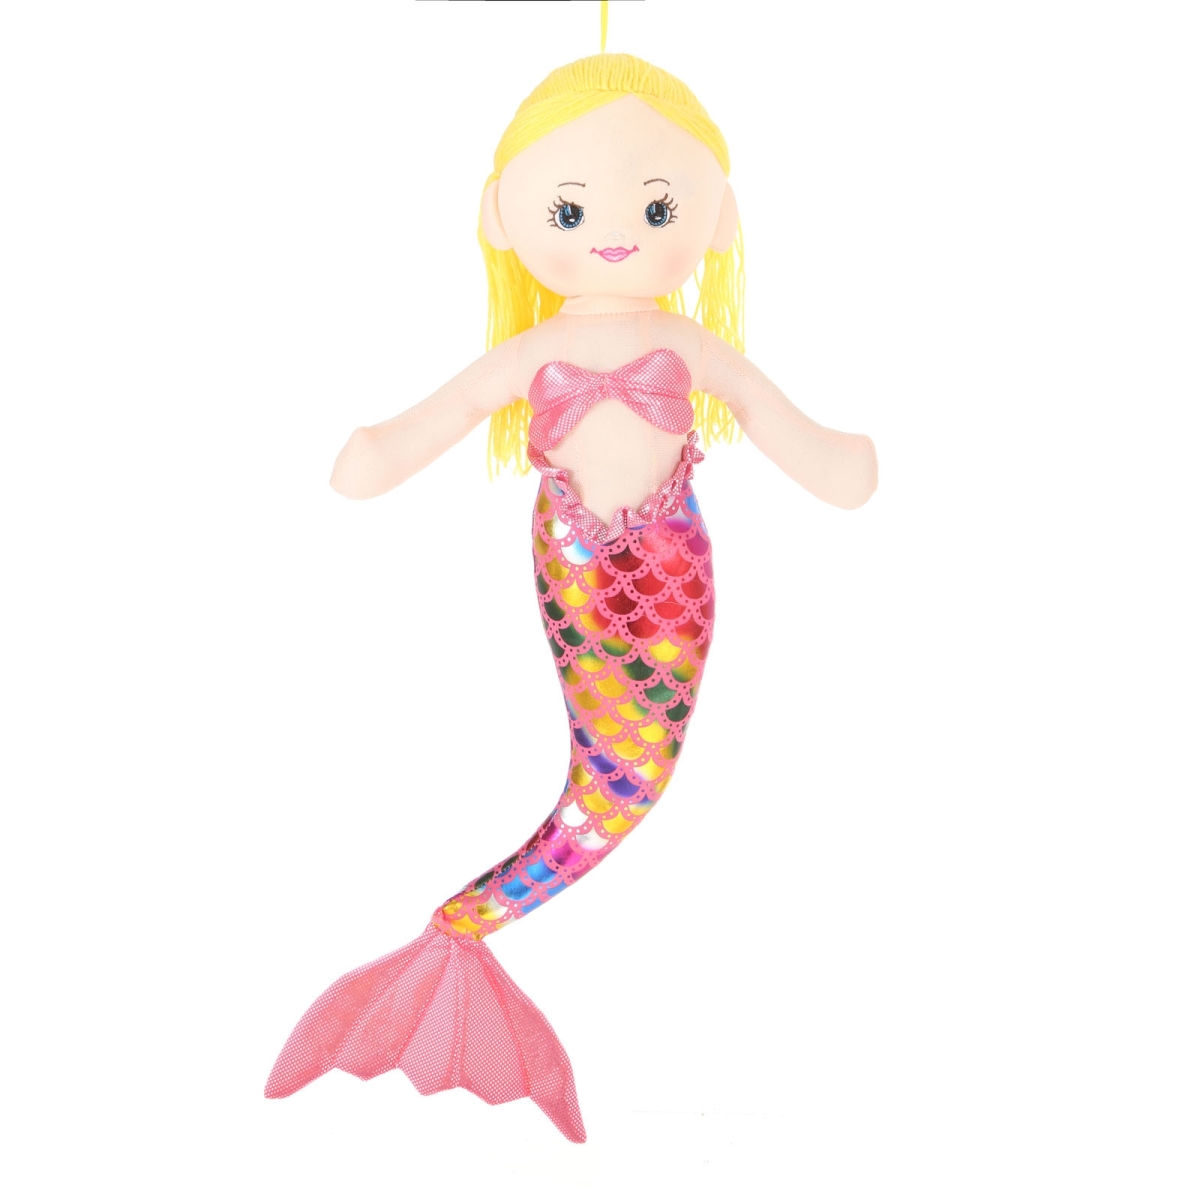 Mm15 28 In. Plush Blond Haired Mermaid